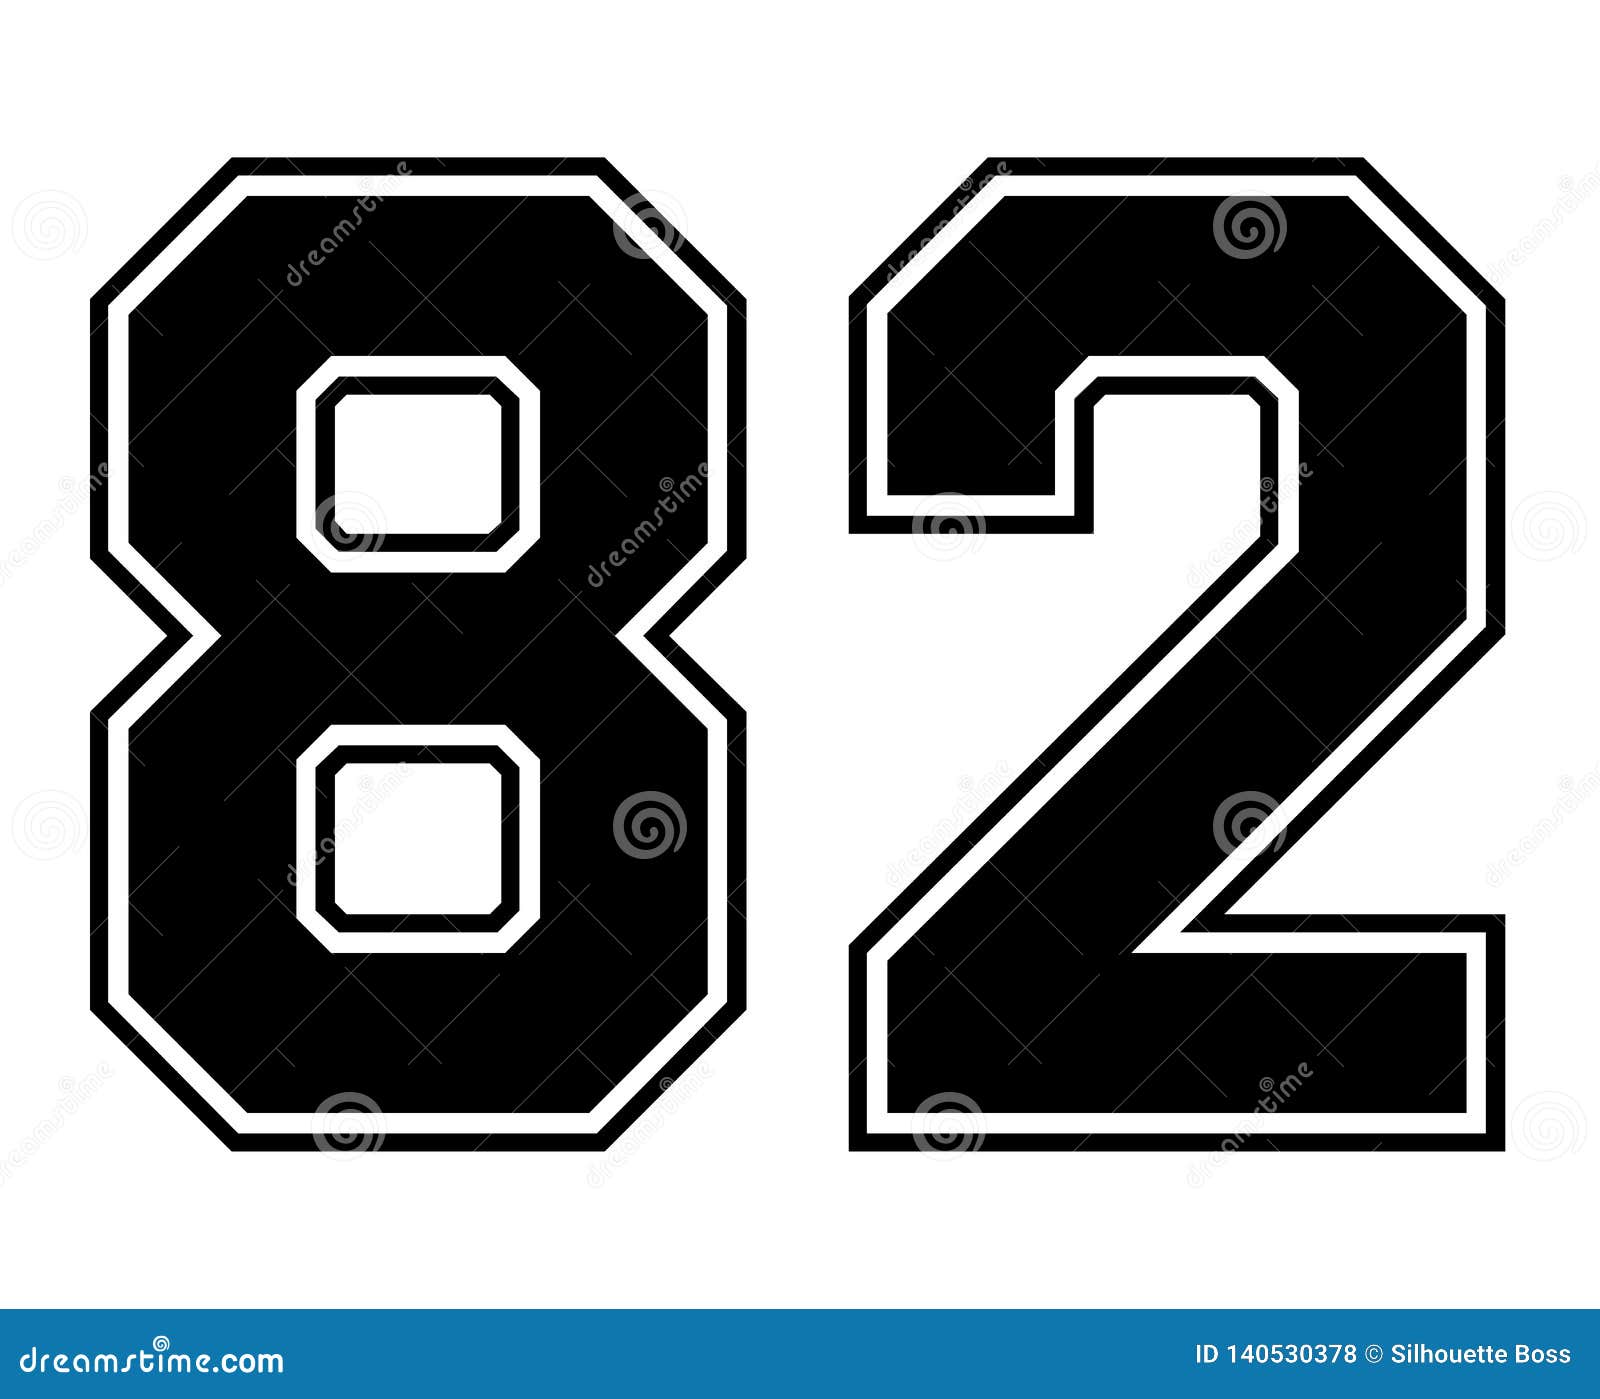 82 Classic Vintage Sport Jersey Number in Black Number on White Background  for American Football, Baseball or Basketball Stock Illustration -  Illustration of numbers, football: 140530378